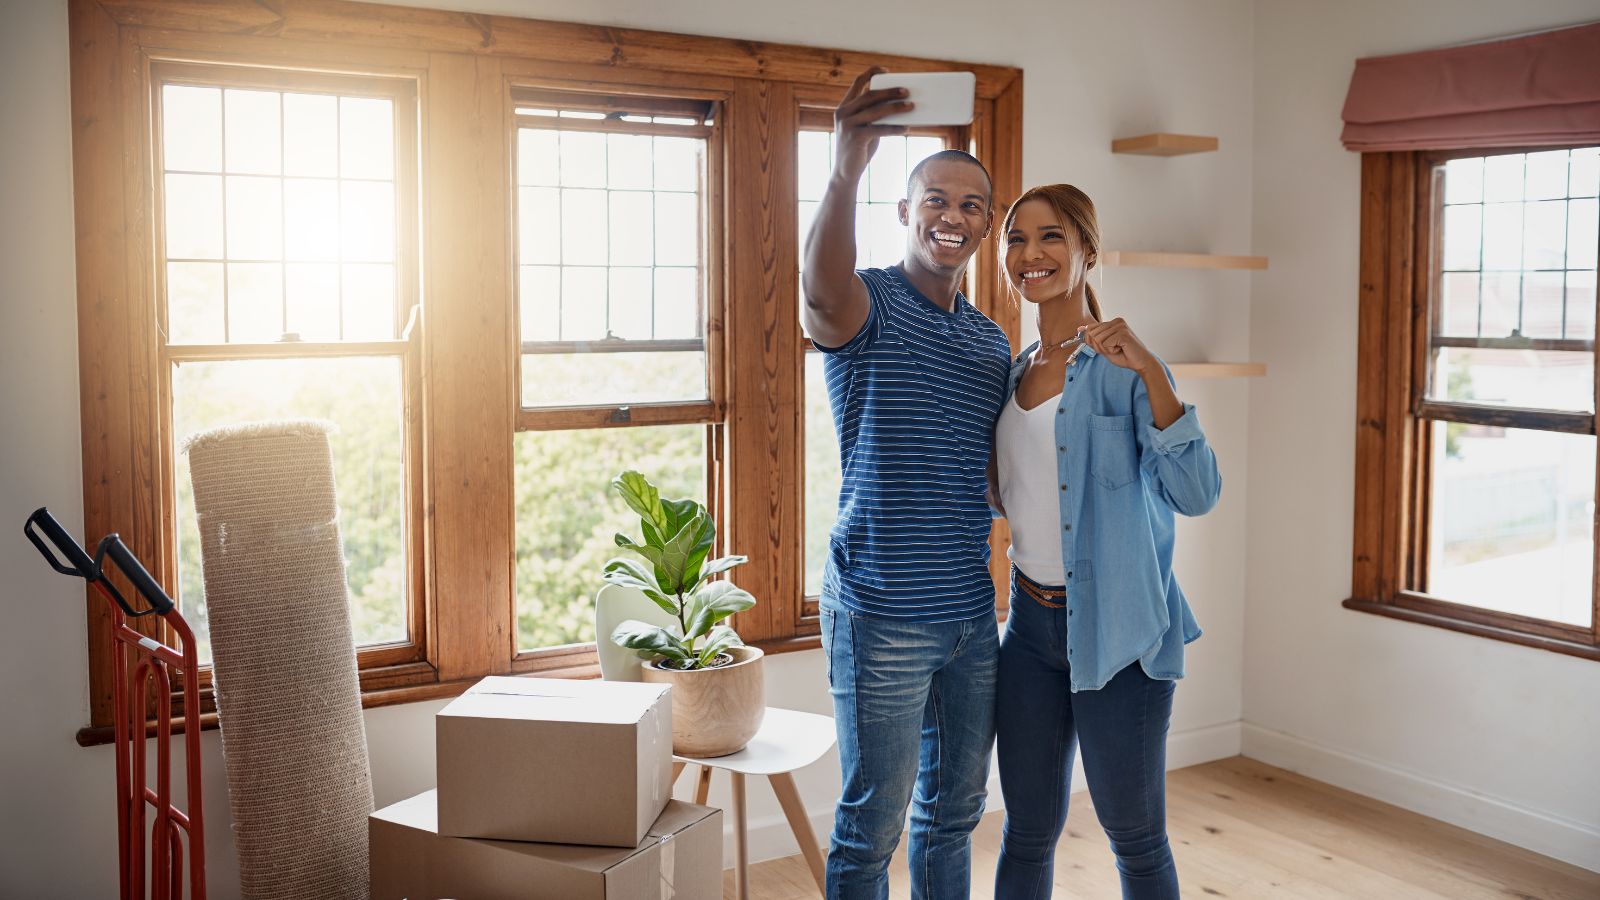 More unmarried couples are buying homes together. They make up 18% of all first-time homebuyers, ac...